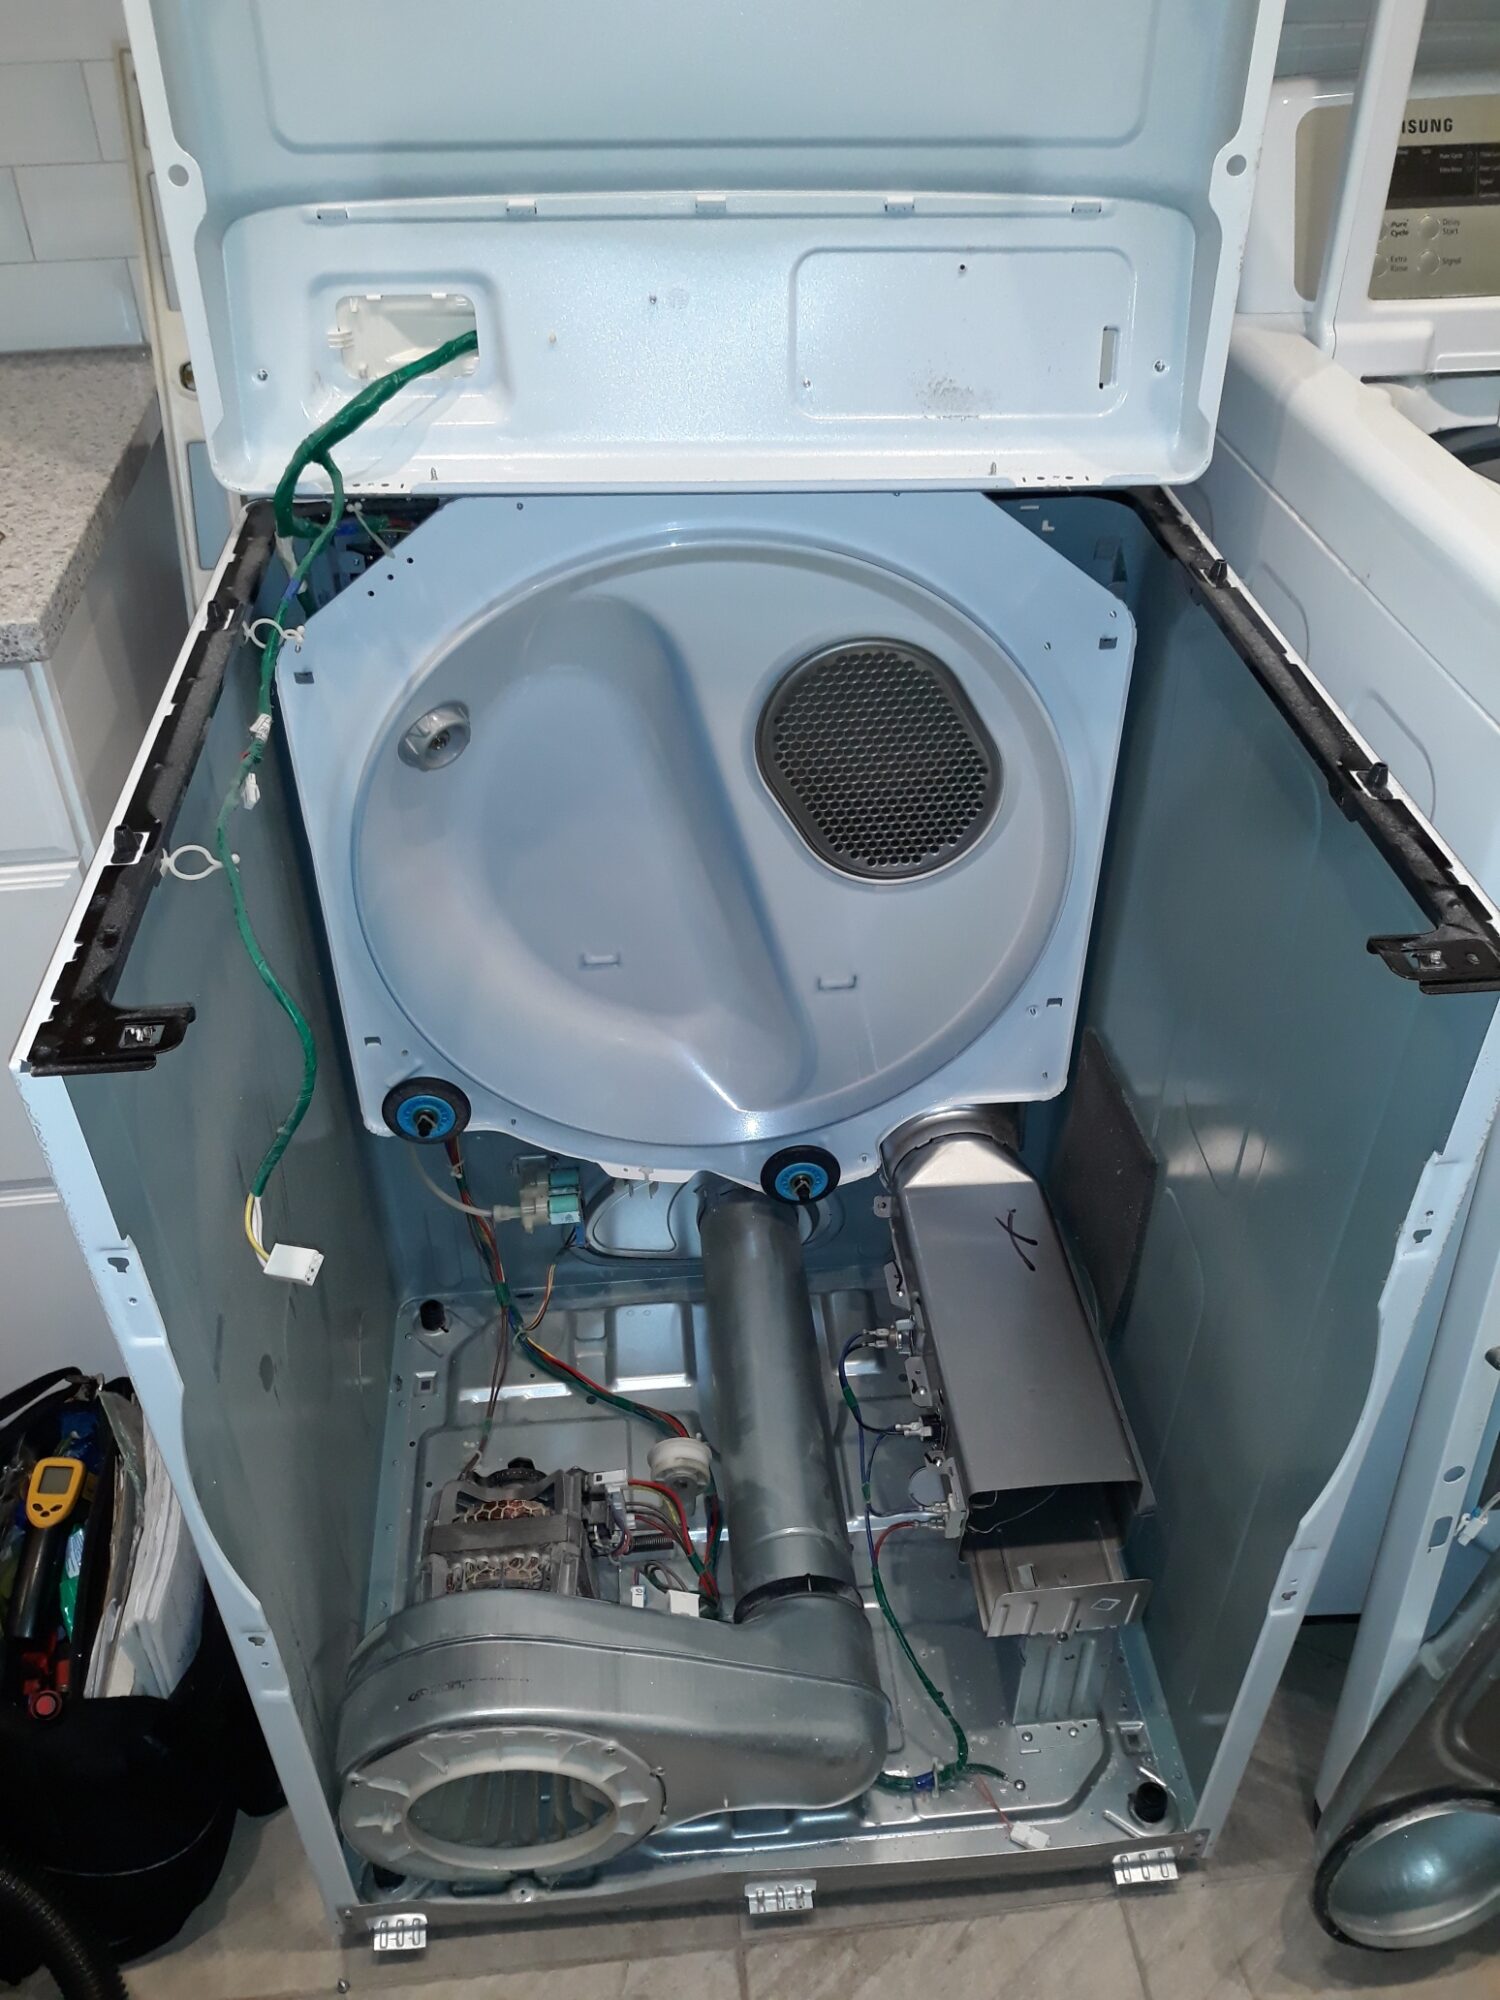 appliance repair dryer repair repair required replacement of the heating element assembly due to an open element coil circuit george street atlantic beach fl 32233